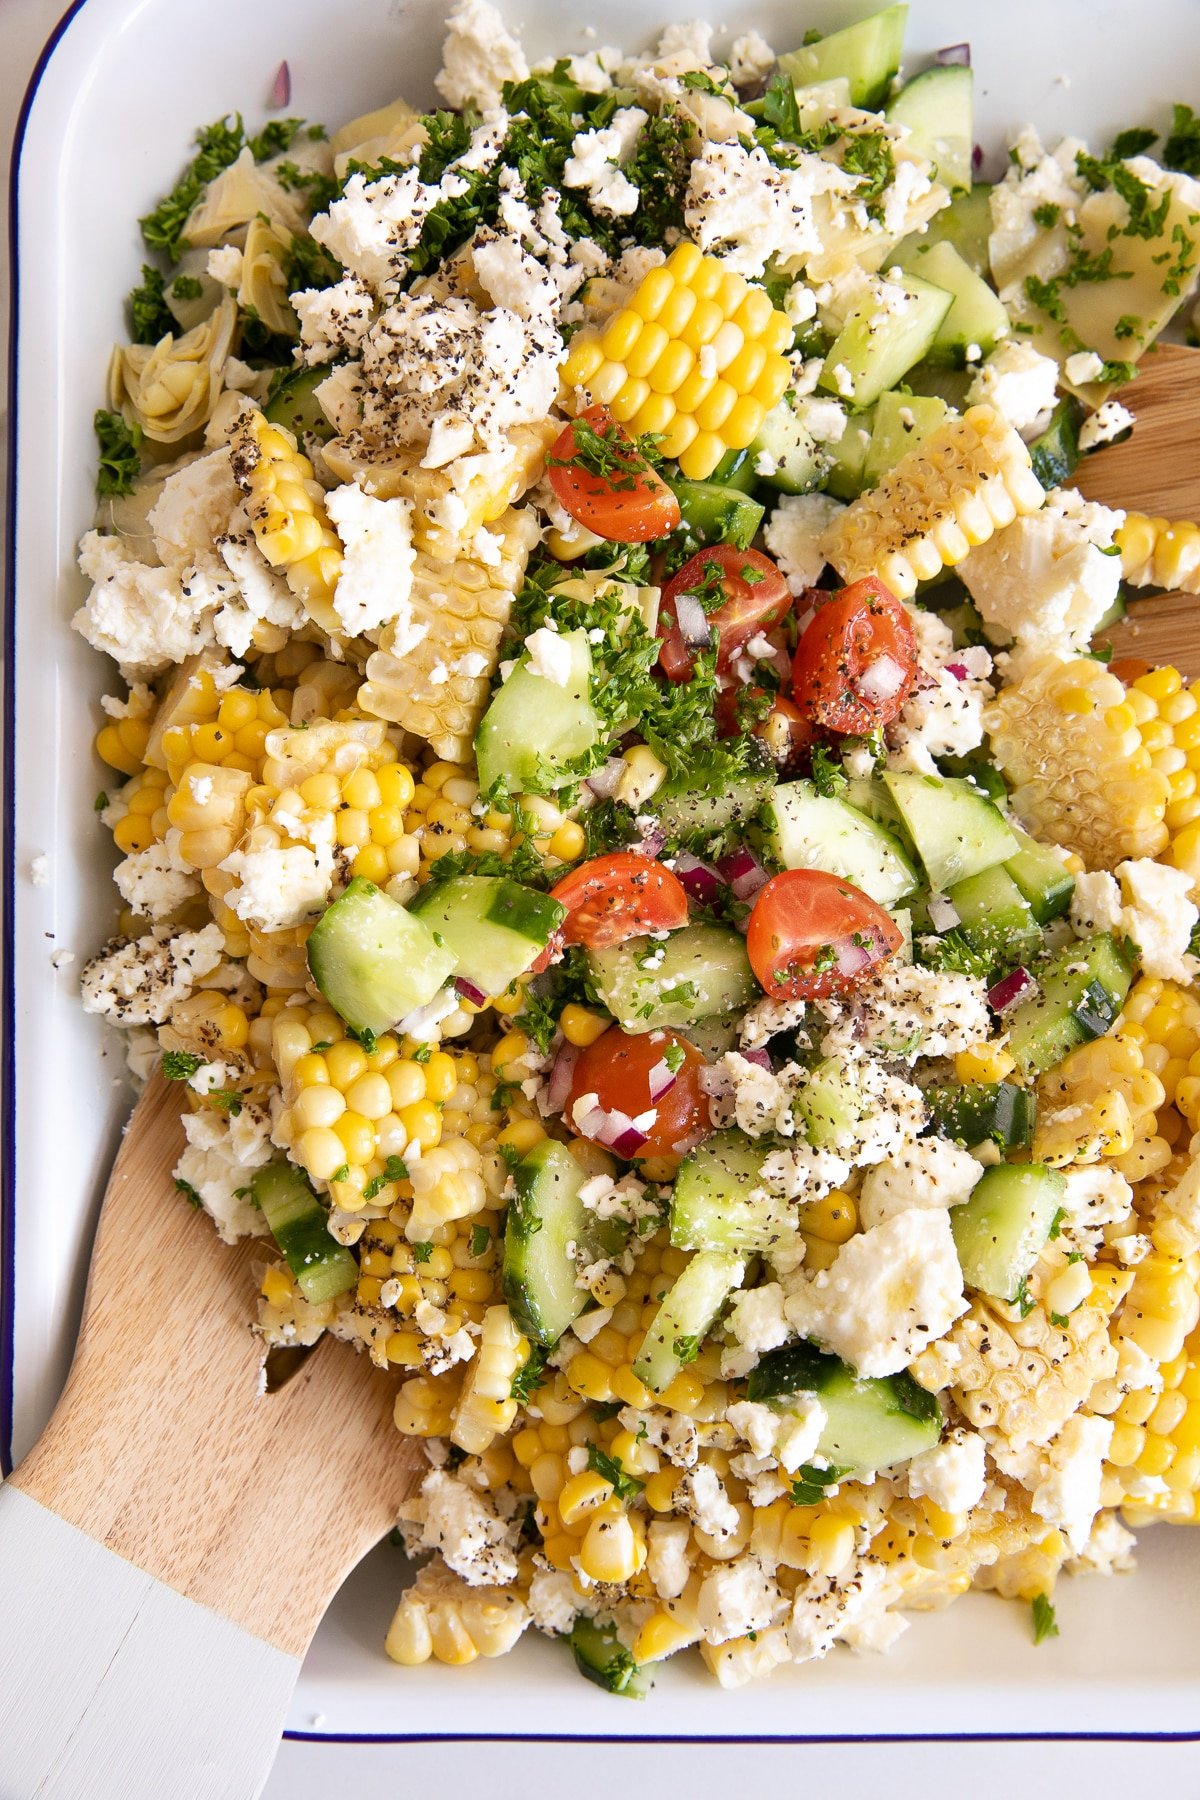 Platter filled with all of the ingredients for corn salad including corn, cucumber, feta cheese, artichoke hearts, and cherry tomatoes.